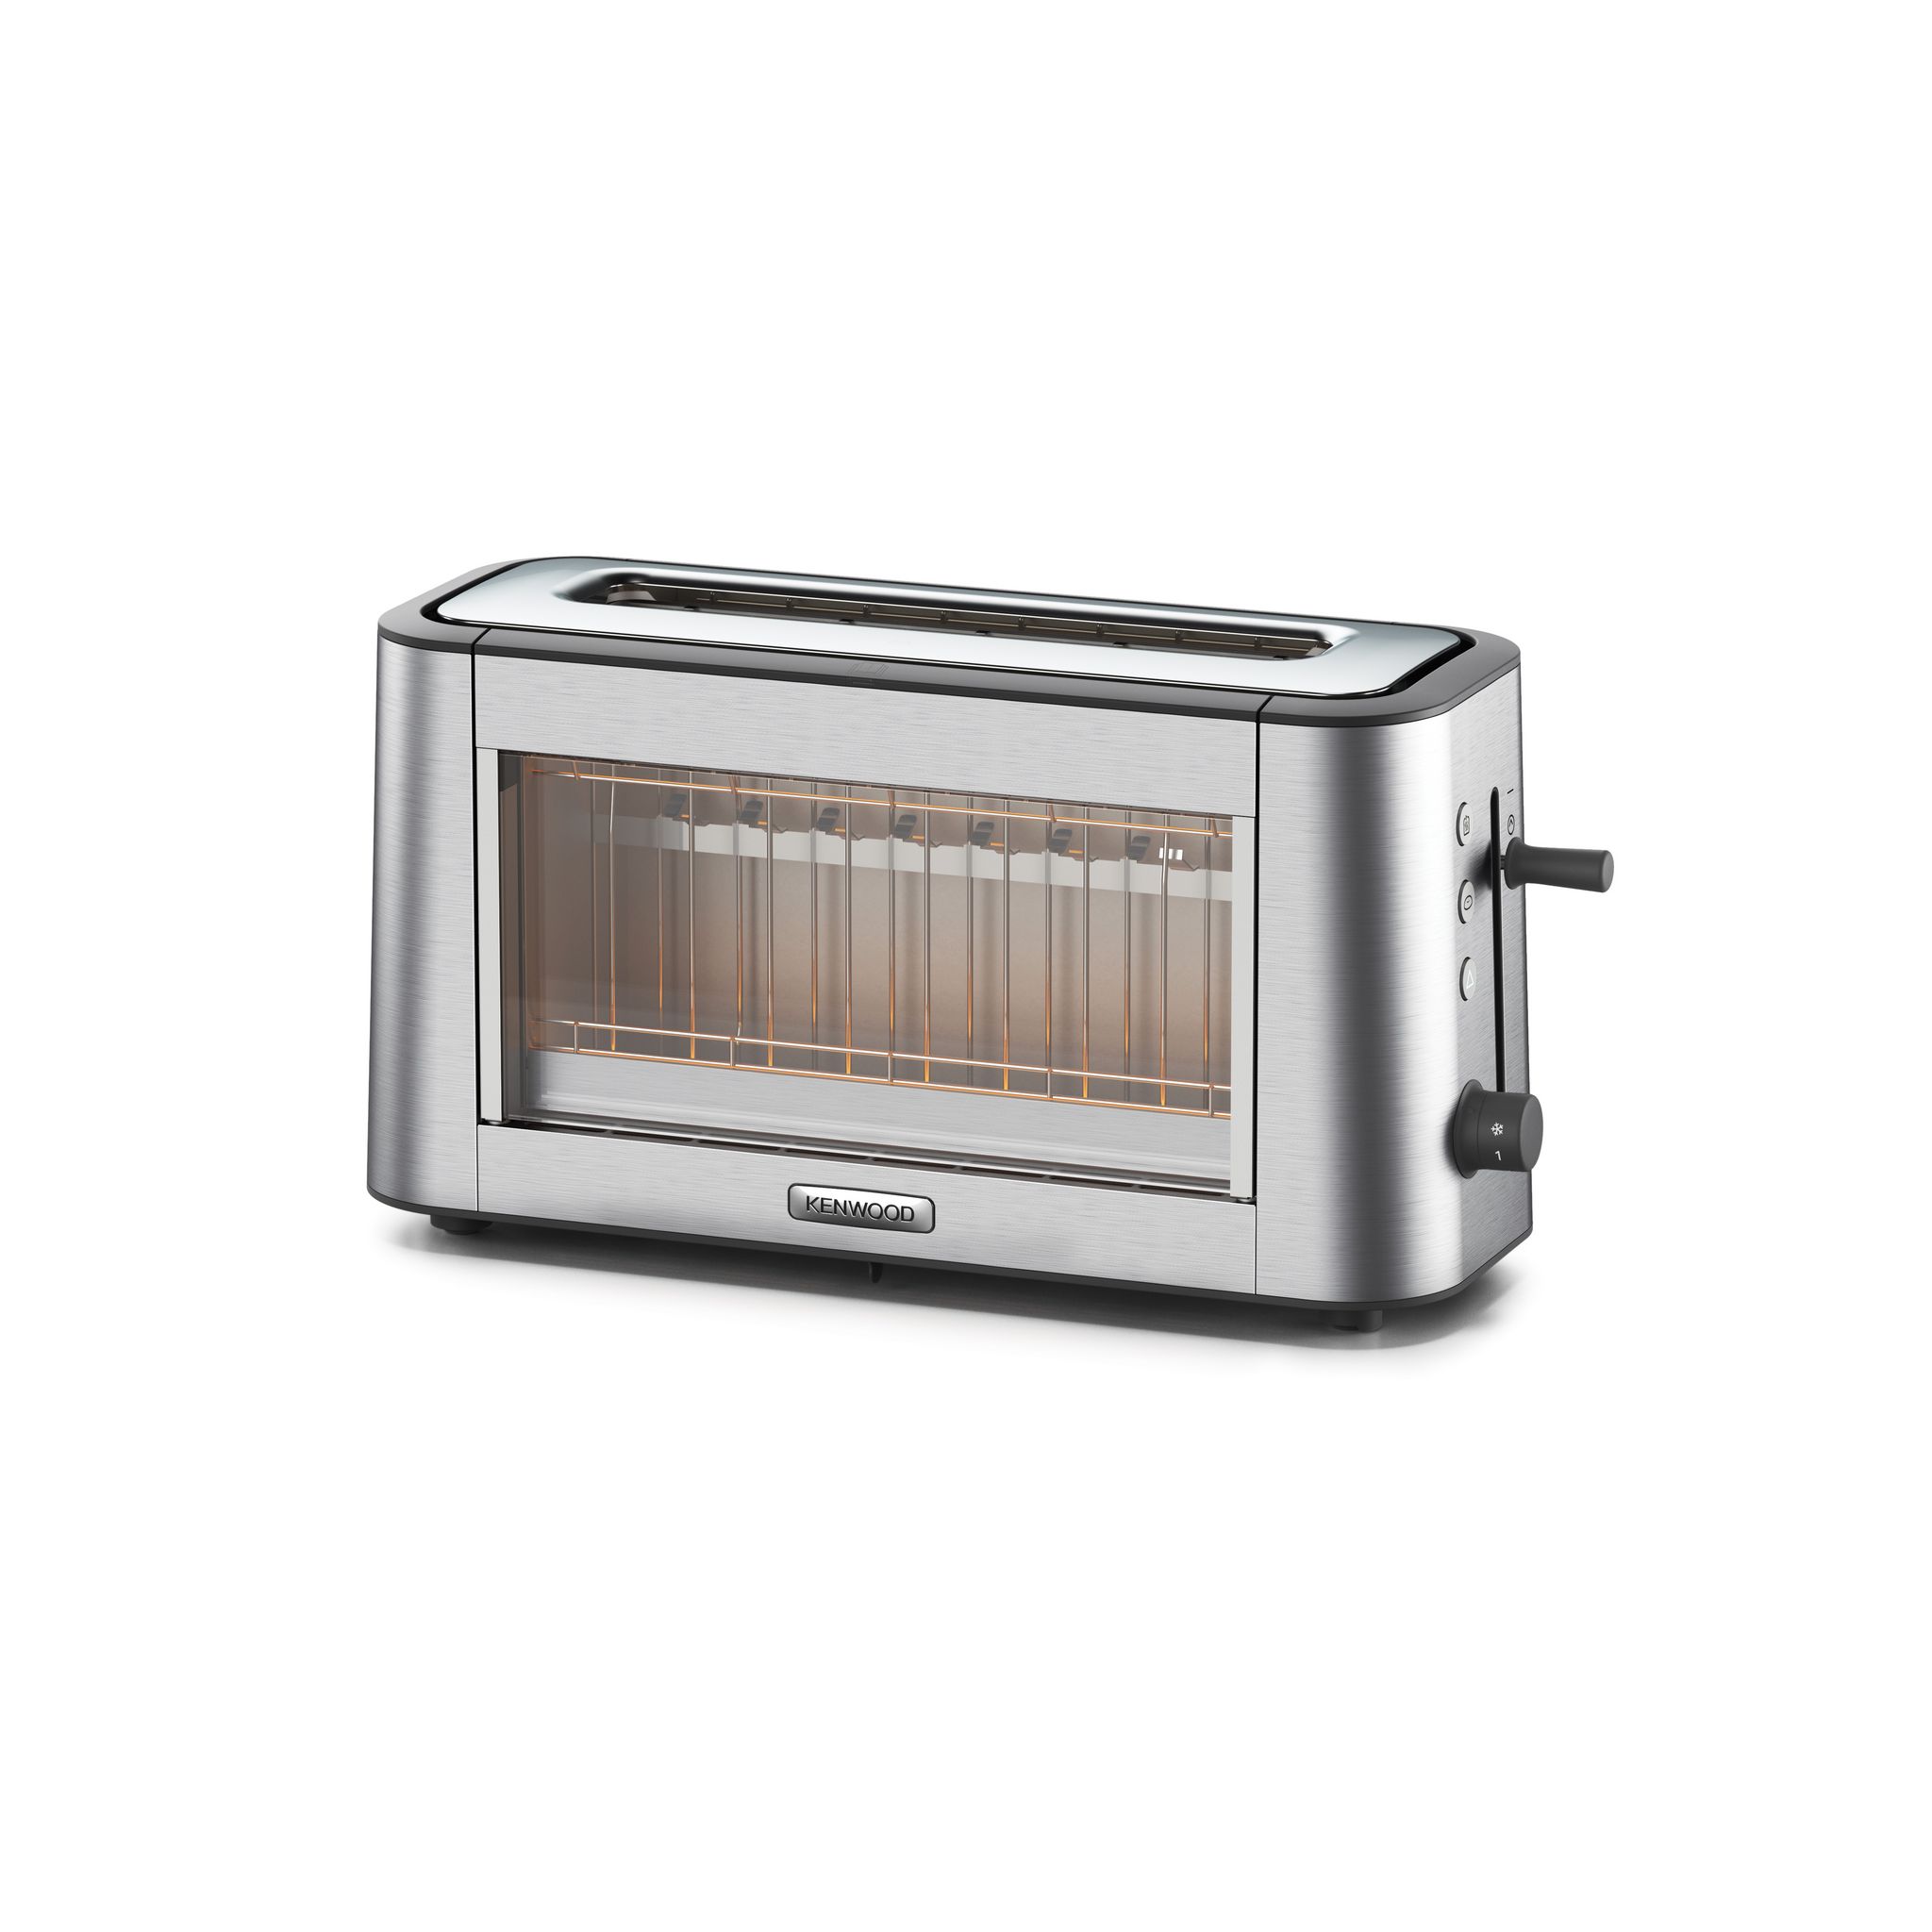 KENWOOD Grille pain TOG800CL, inox pas cher 